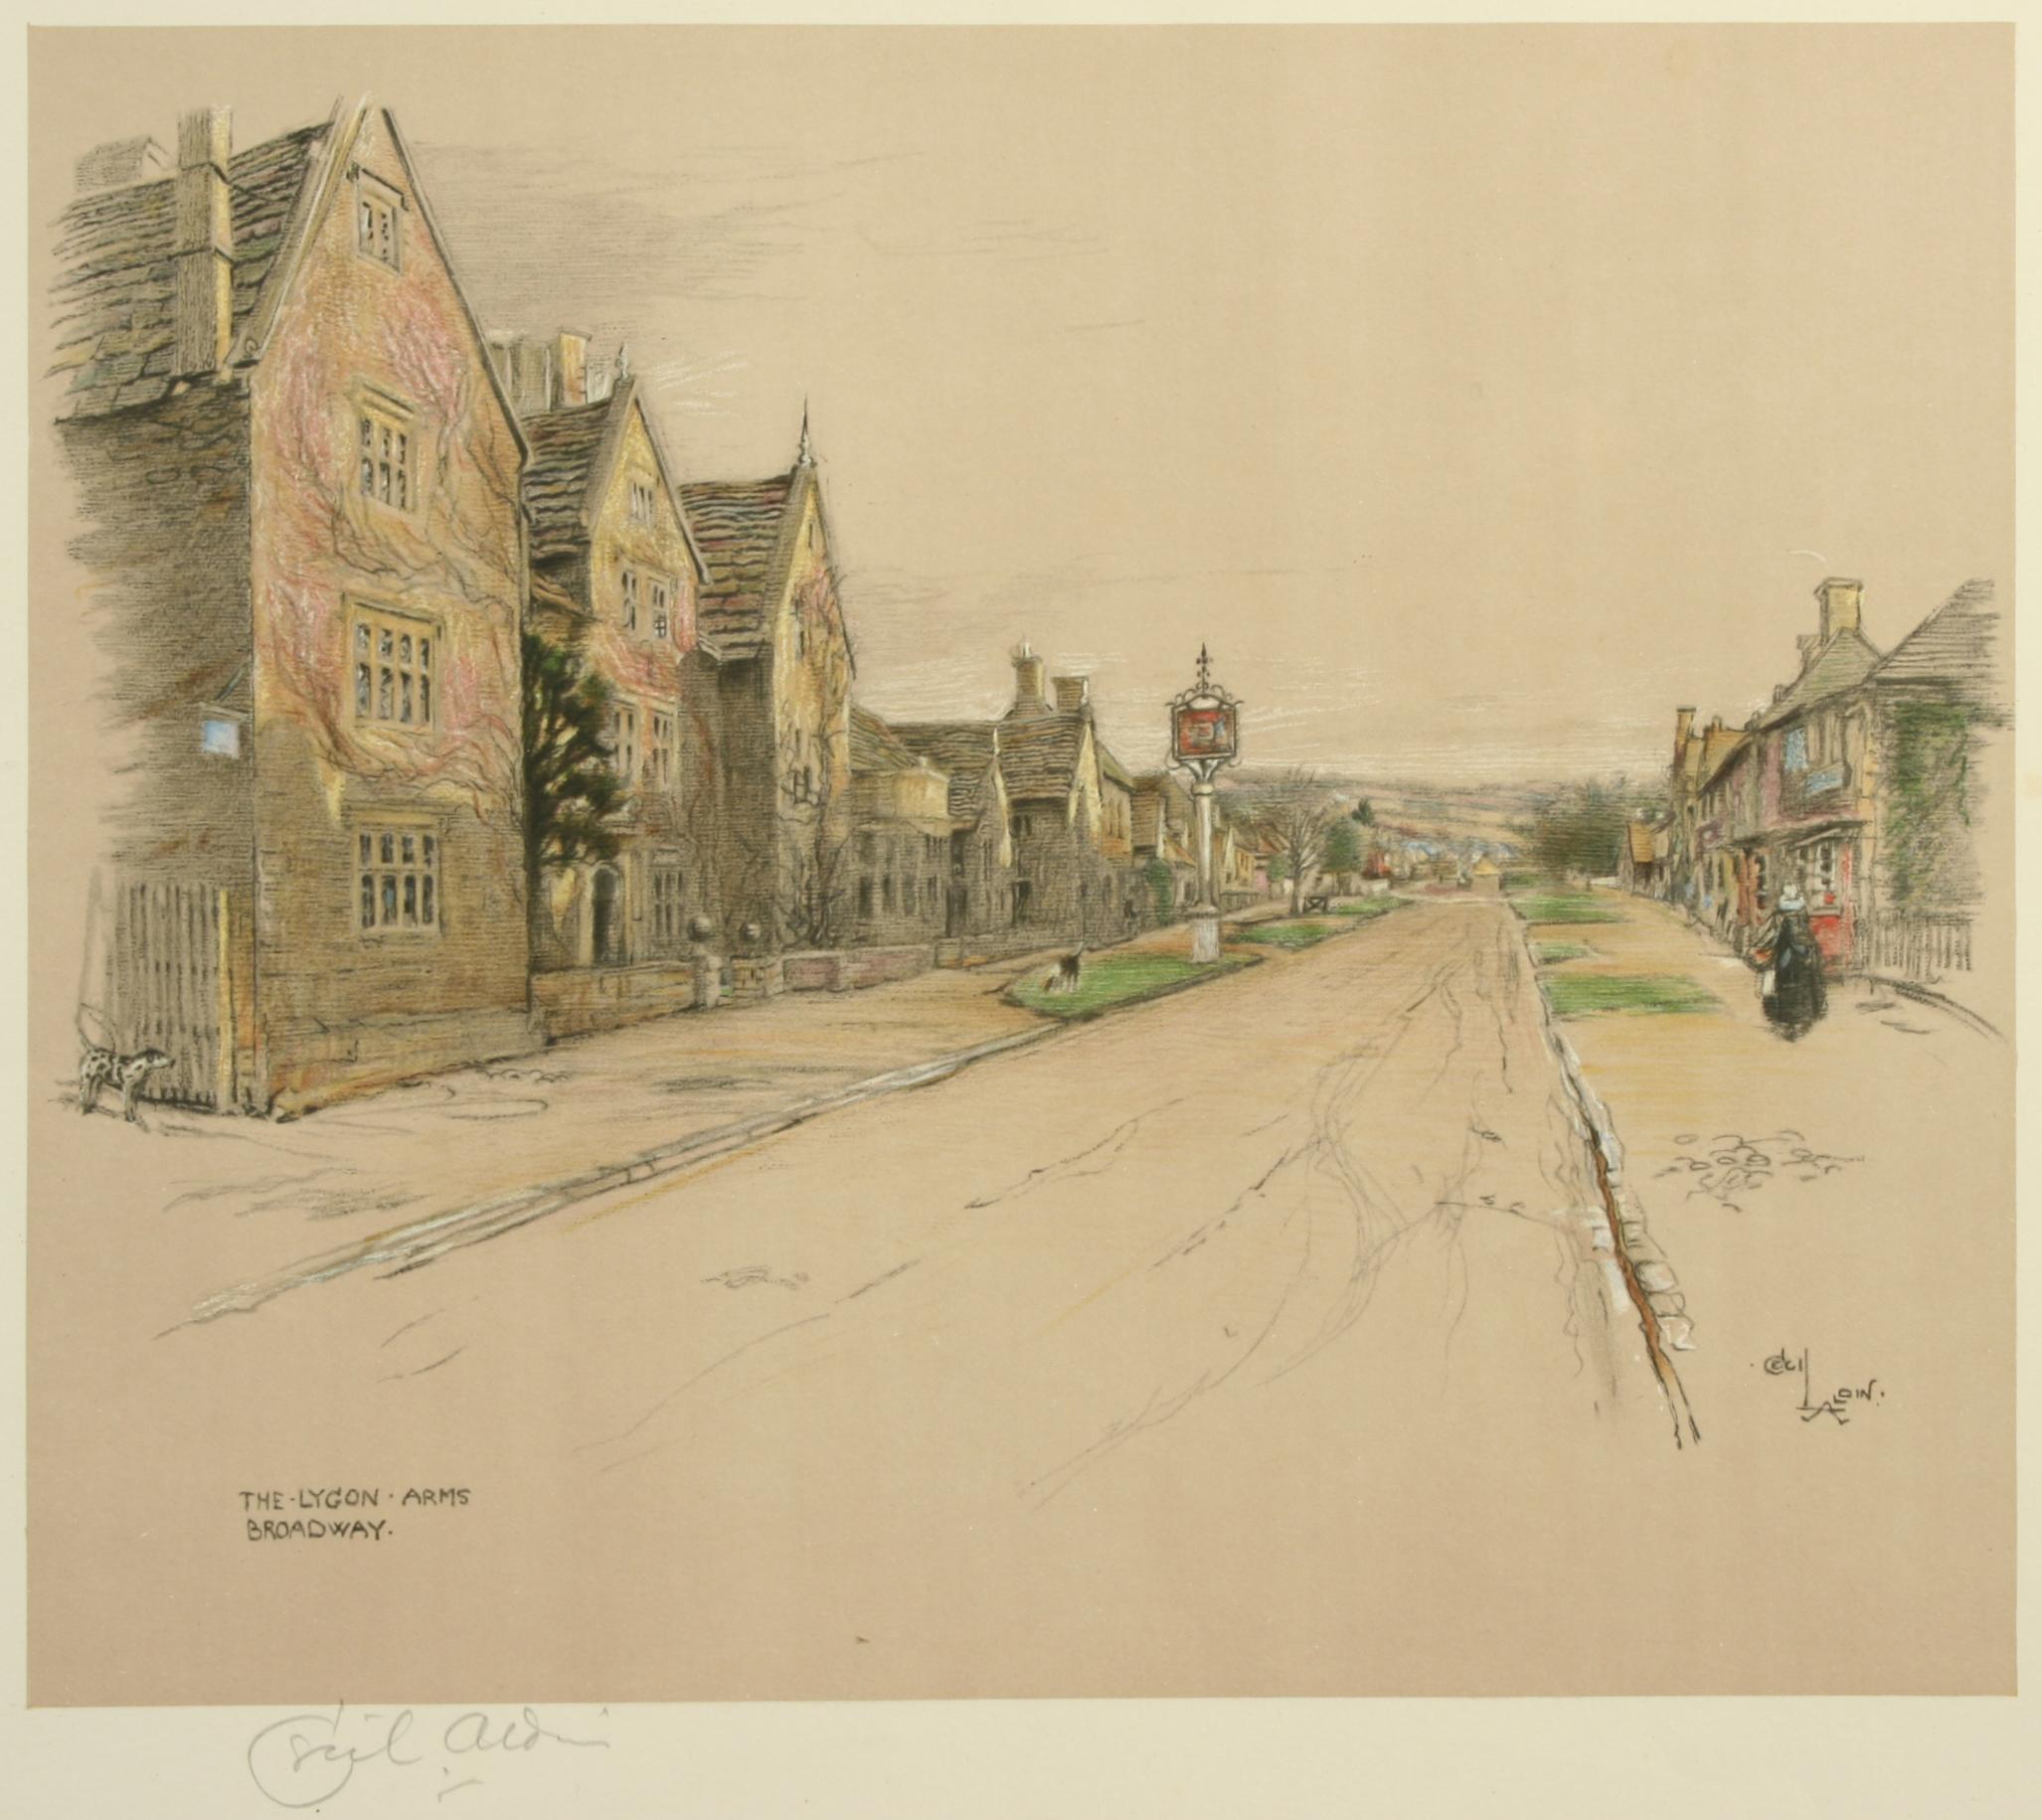 Cecil Aldin, Old Inns, The Lygon Arms, Broadway.
A very nice colorful Chromolithograph by Cecil Aldin of The Lygon Arms in the Cotswolds village of Broadway. The print is published by Eyre & Spottiswoode and signed in pencil by the artist in the